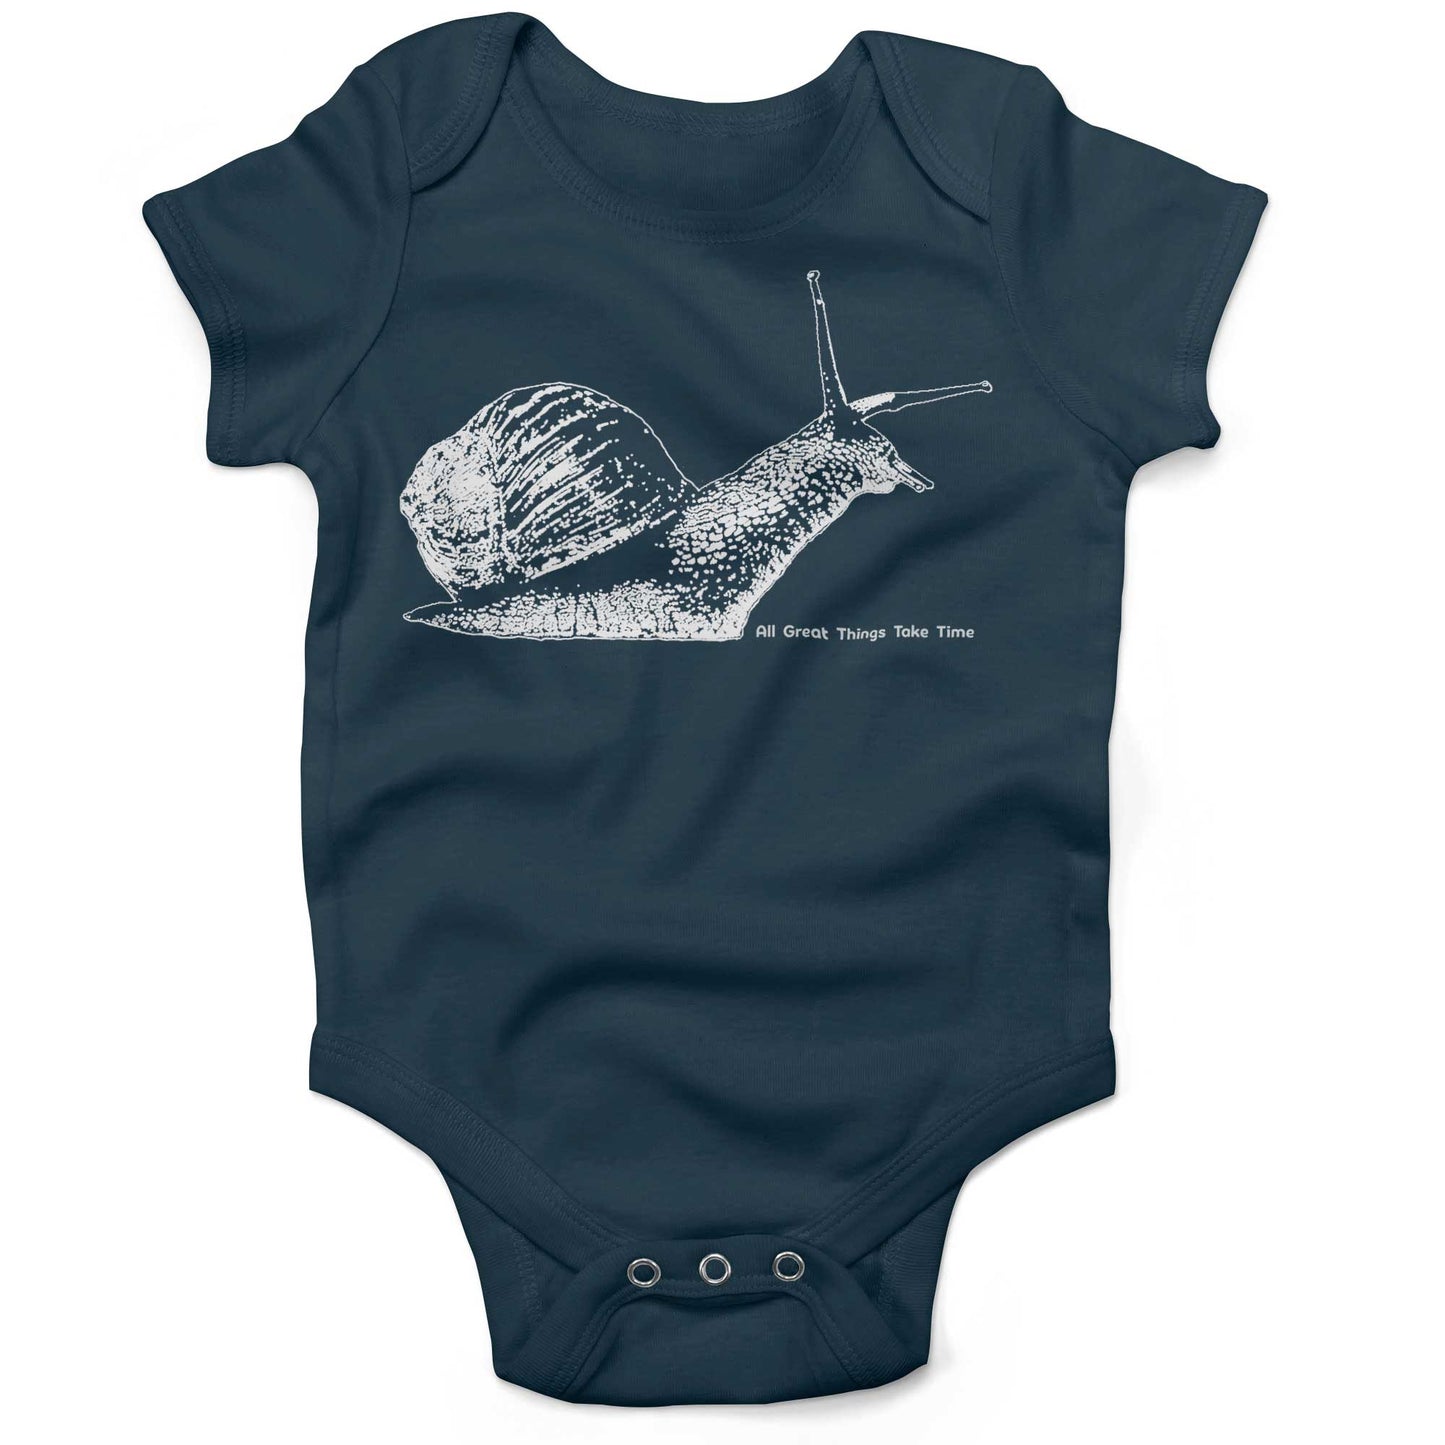 All Great Things Take Time Baby One Piece-Organic Pacific Blue-3-6 months